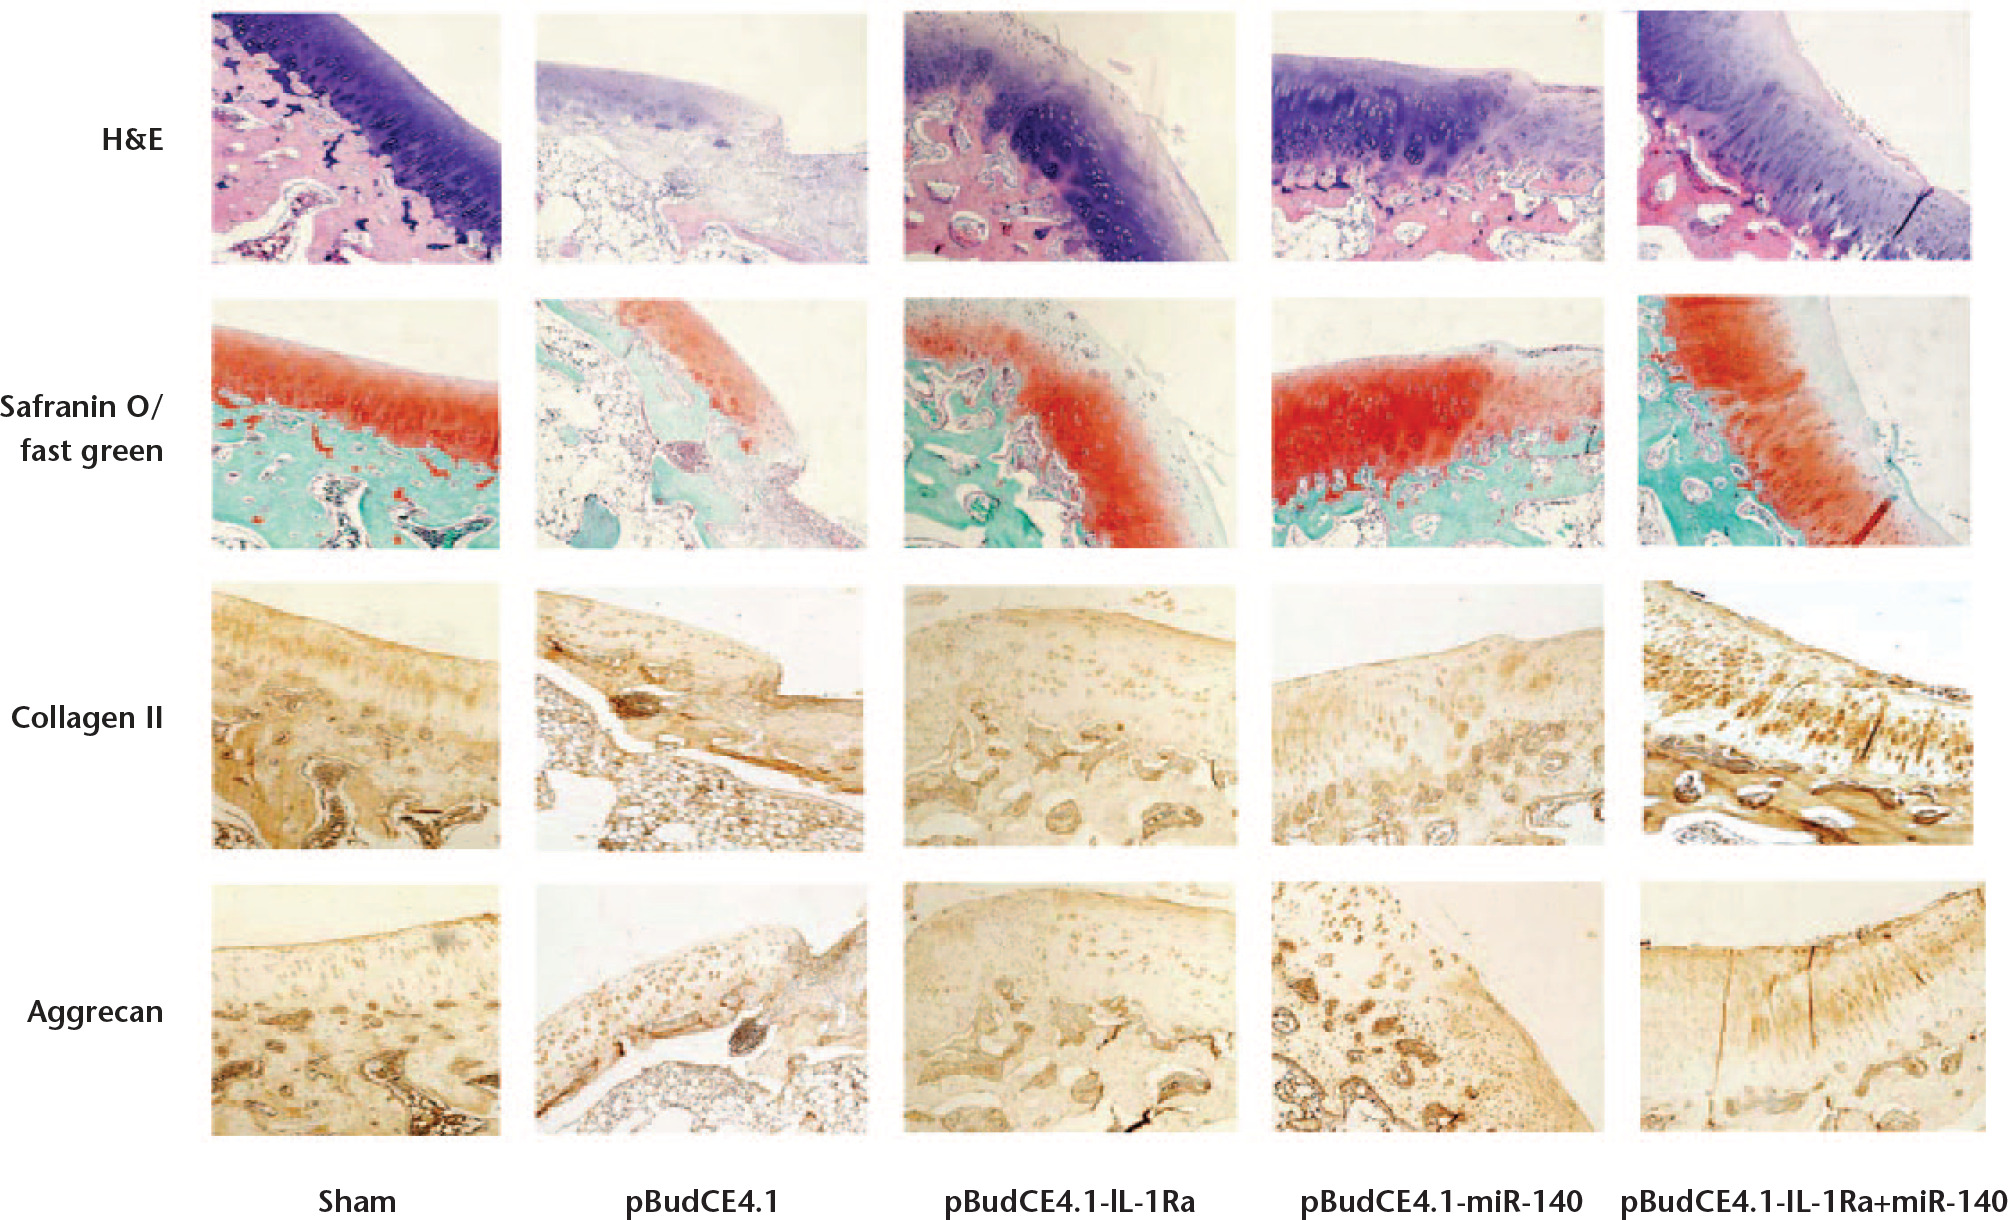 Fig. 7 
            Histological analysis of changes in rabbit articular cartilage. Eight weeks after surgery, the rabbits were sacrificed, and the sagittal medial femoral condyles of knee were stained with haematoxylin and eosin (H&E), safranin O/fast green, collagen II, and aggrecan. The data shown are representative microscopic images of rabbit knees from each group (original magnification 40×).
          